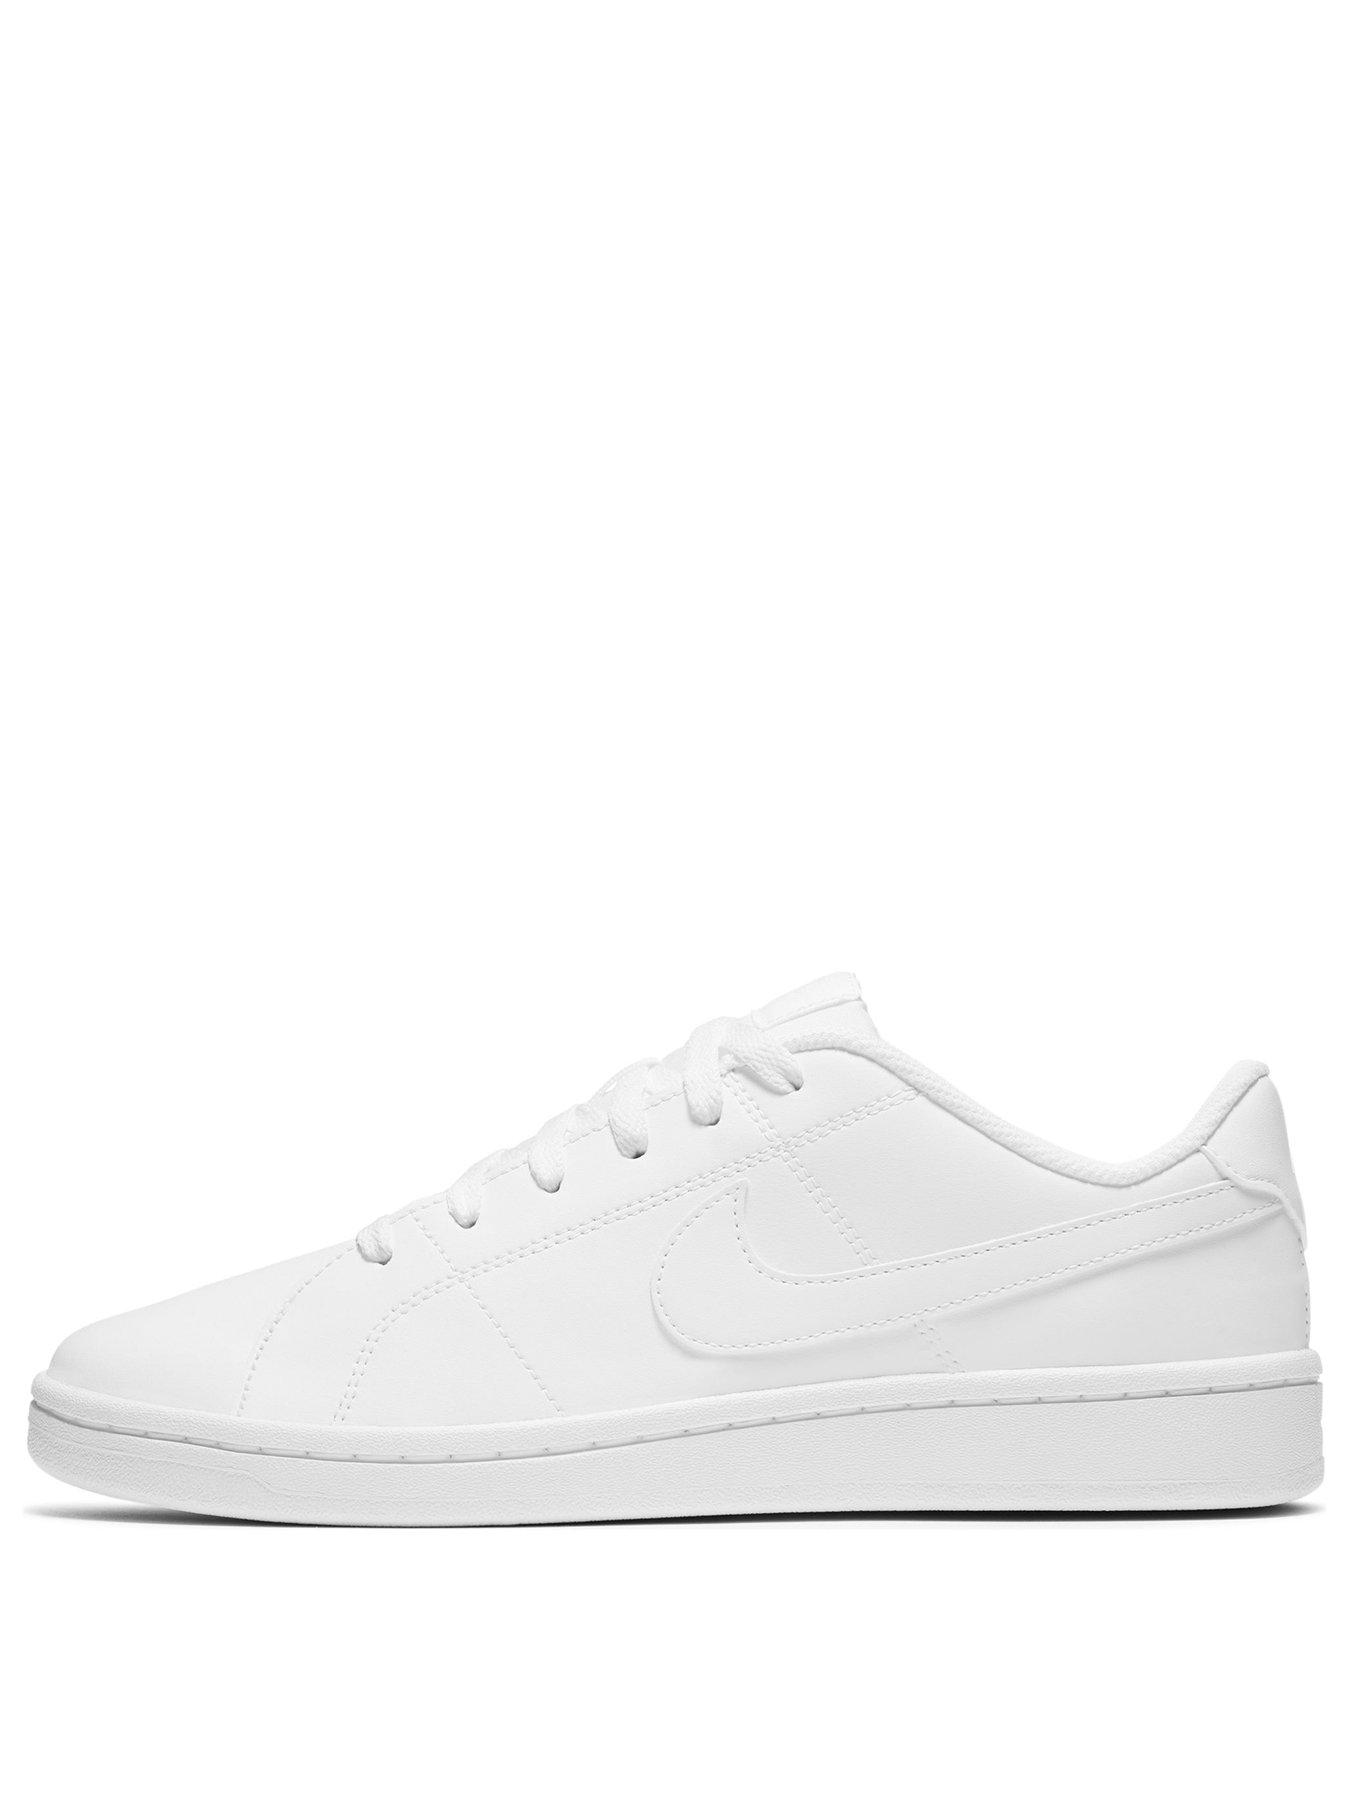 court royale trainers mens